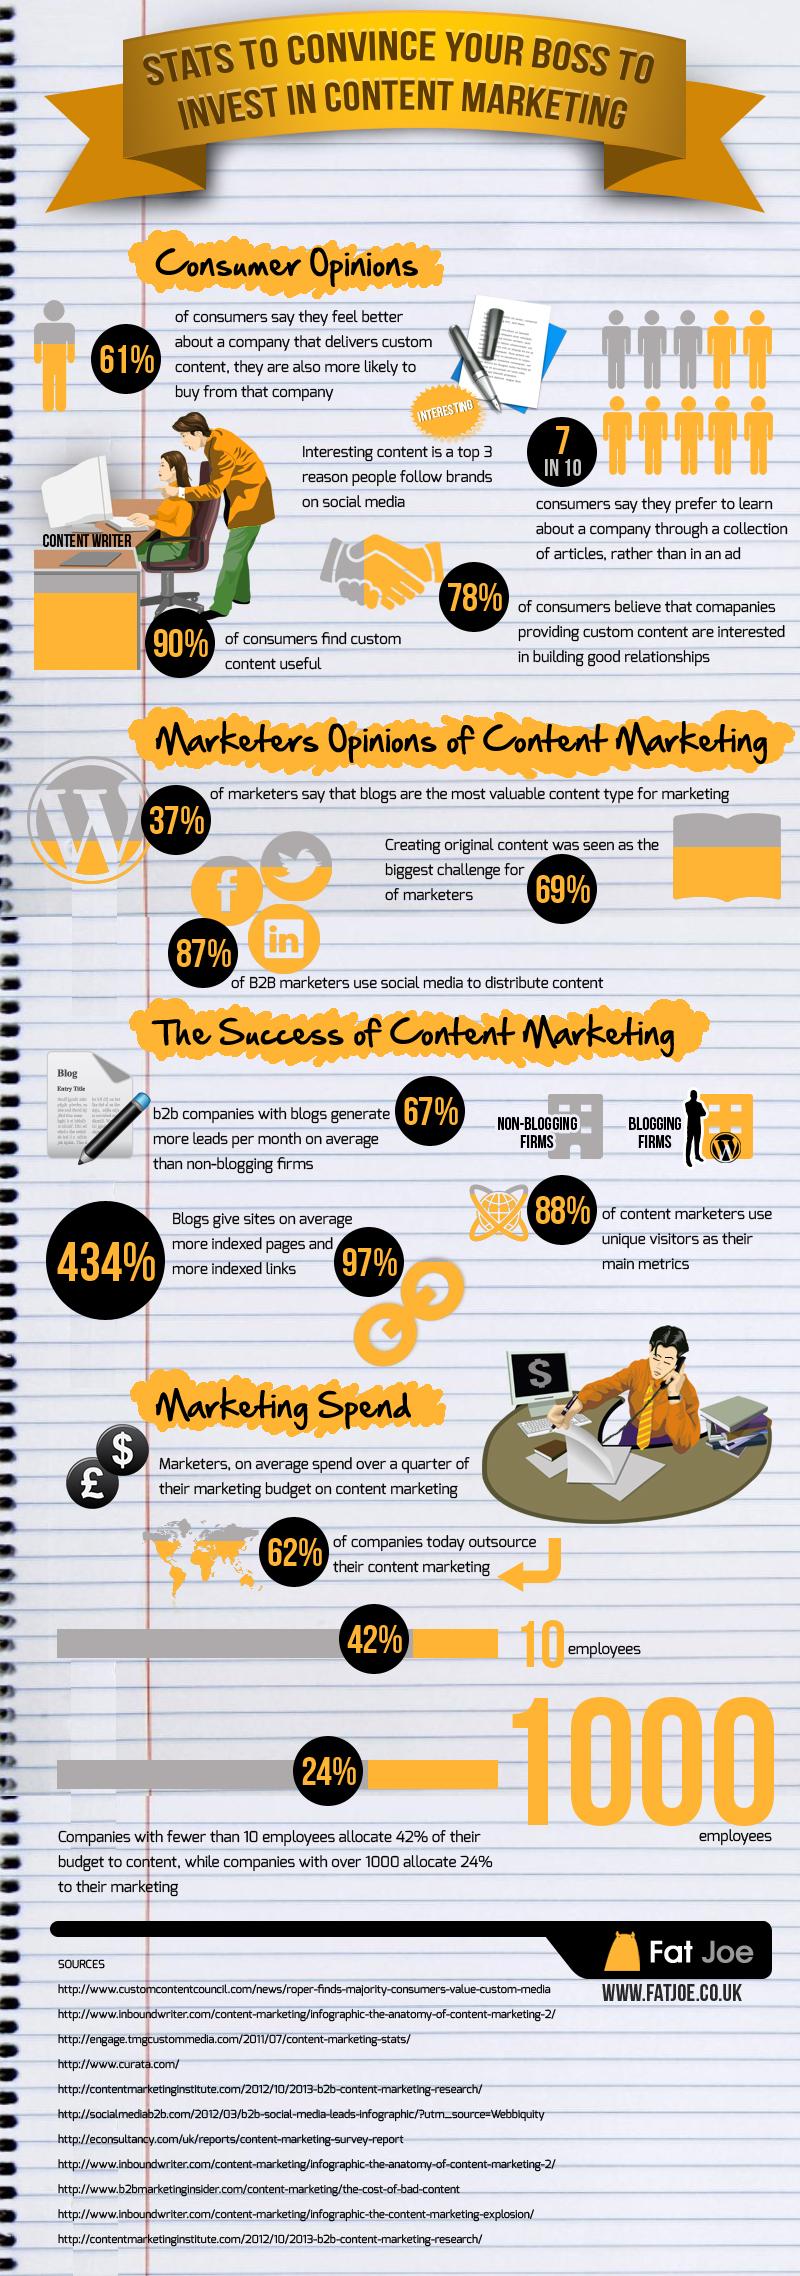 stats-to-convince-your-boss-to-invest-in-content-marketing_51d6f07deb57b